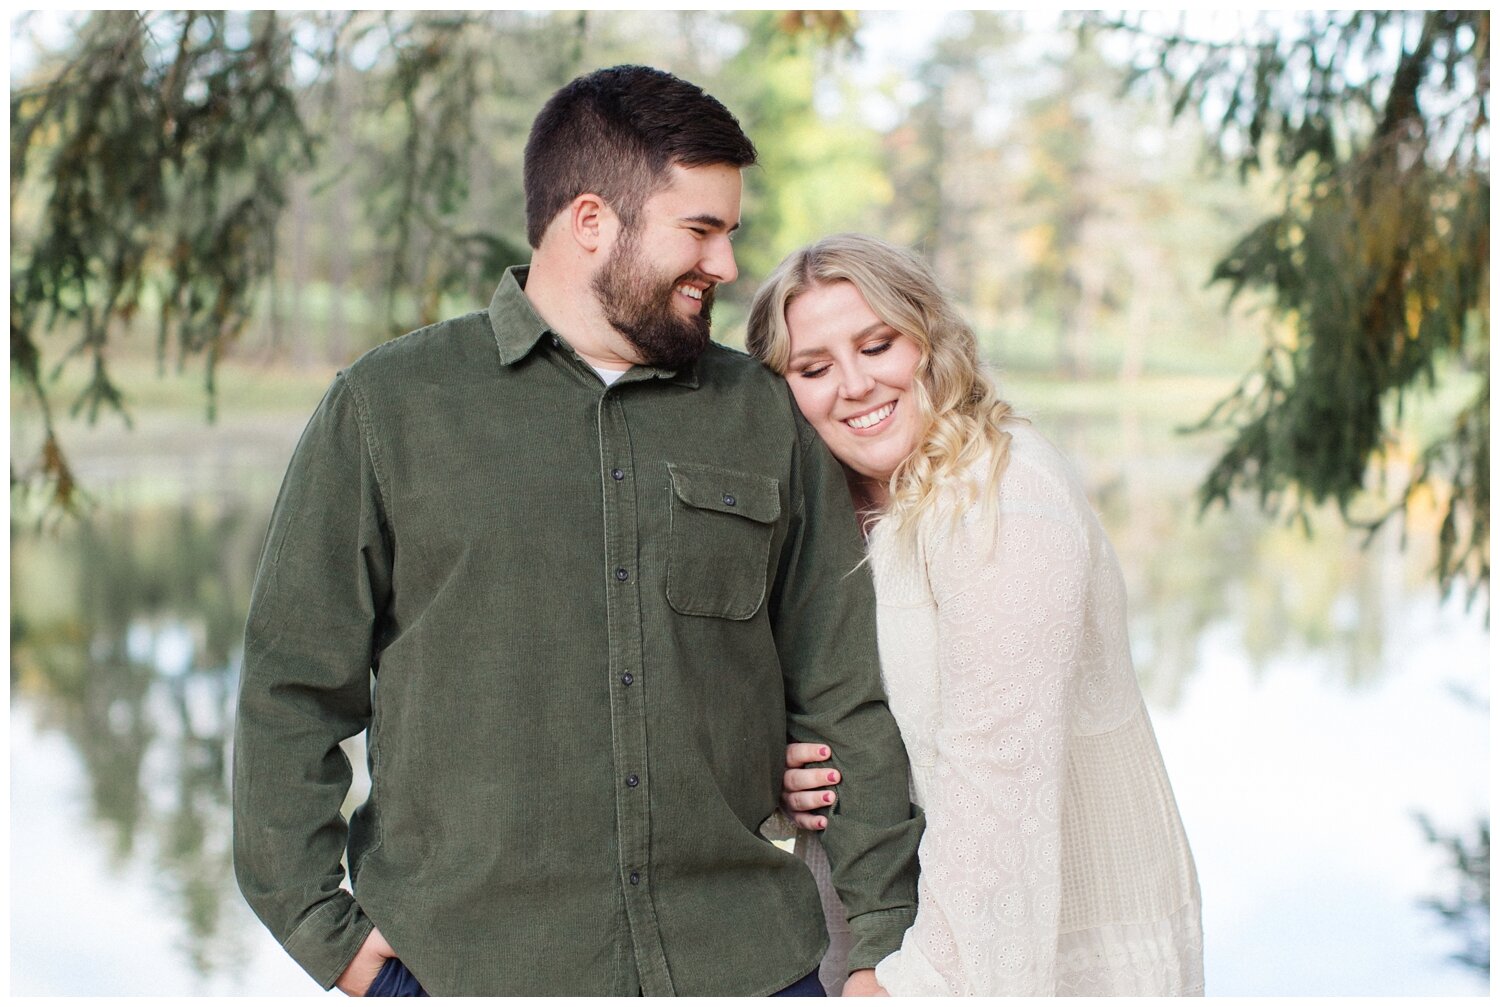 Clarks Summit PA Fall Engagement Session_0017.jpg